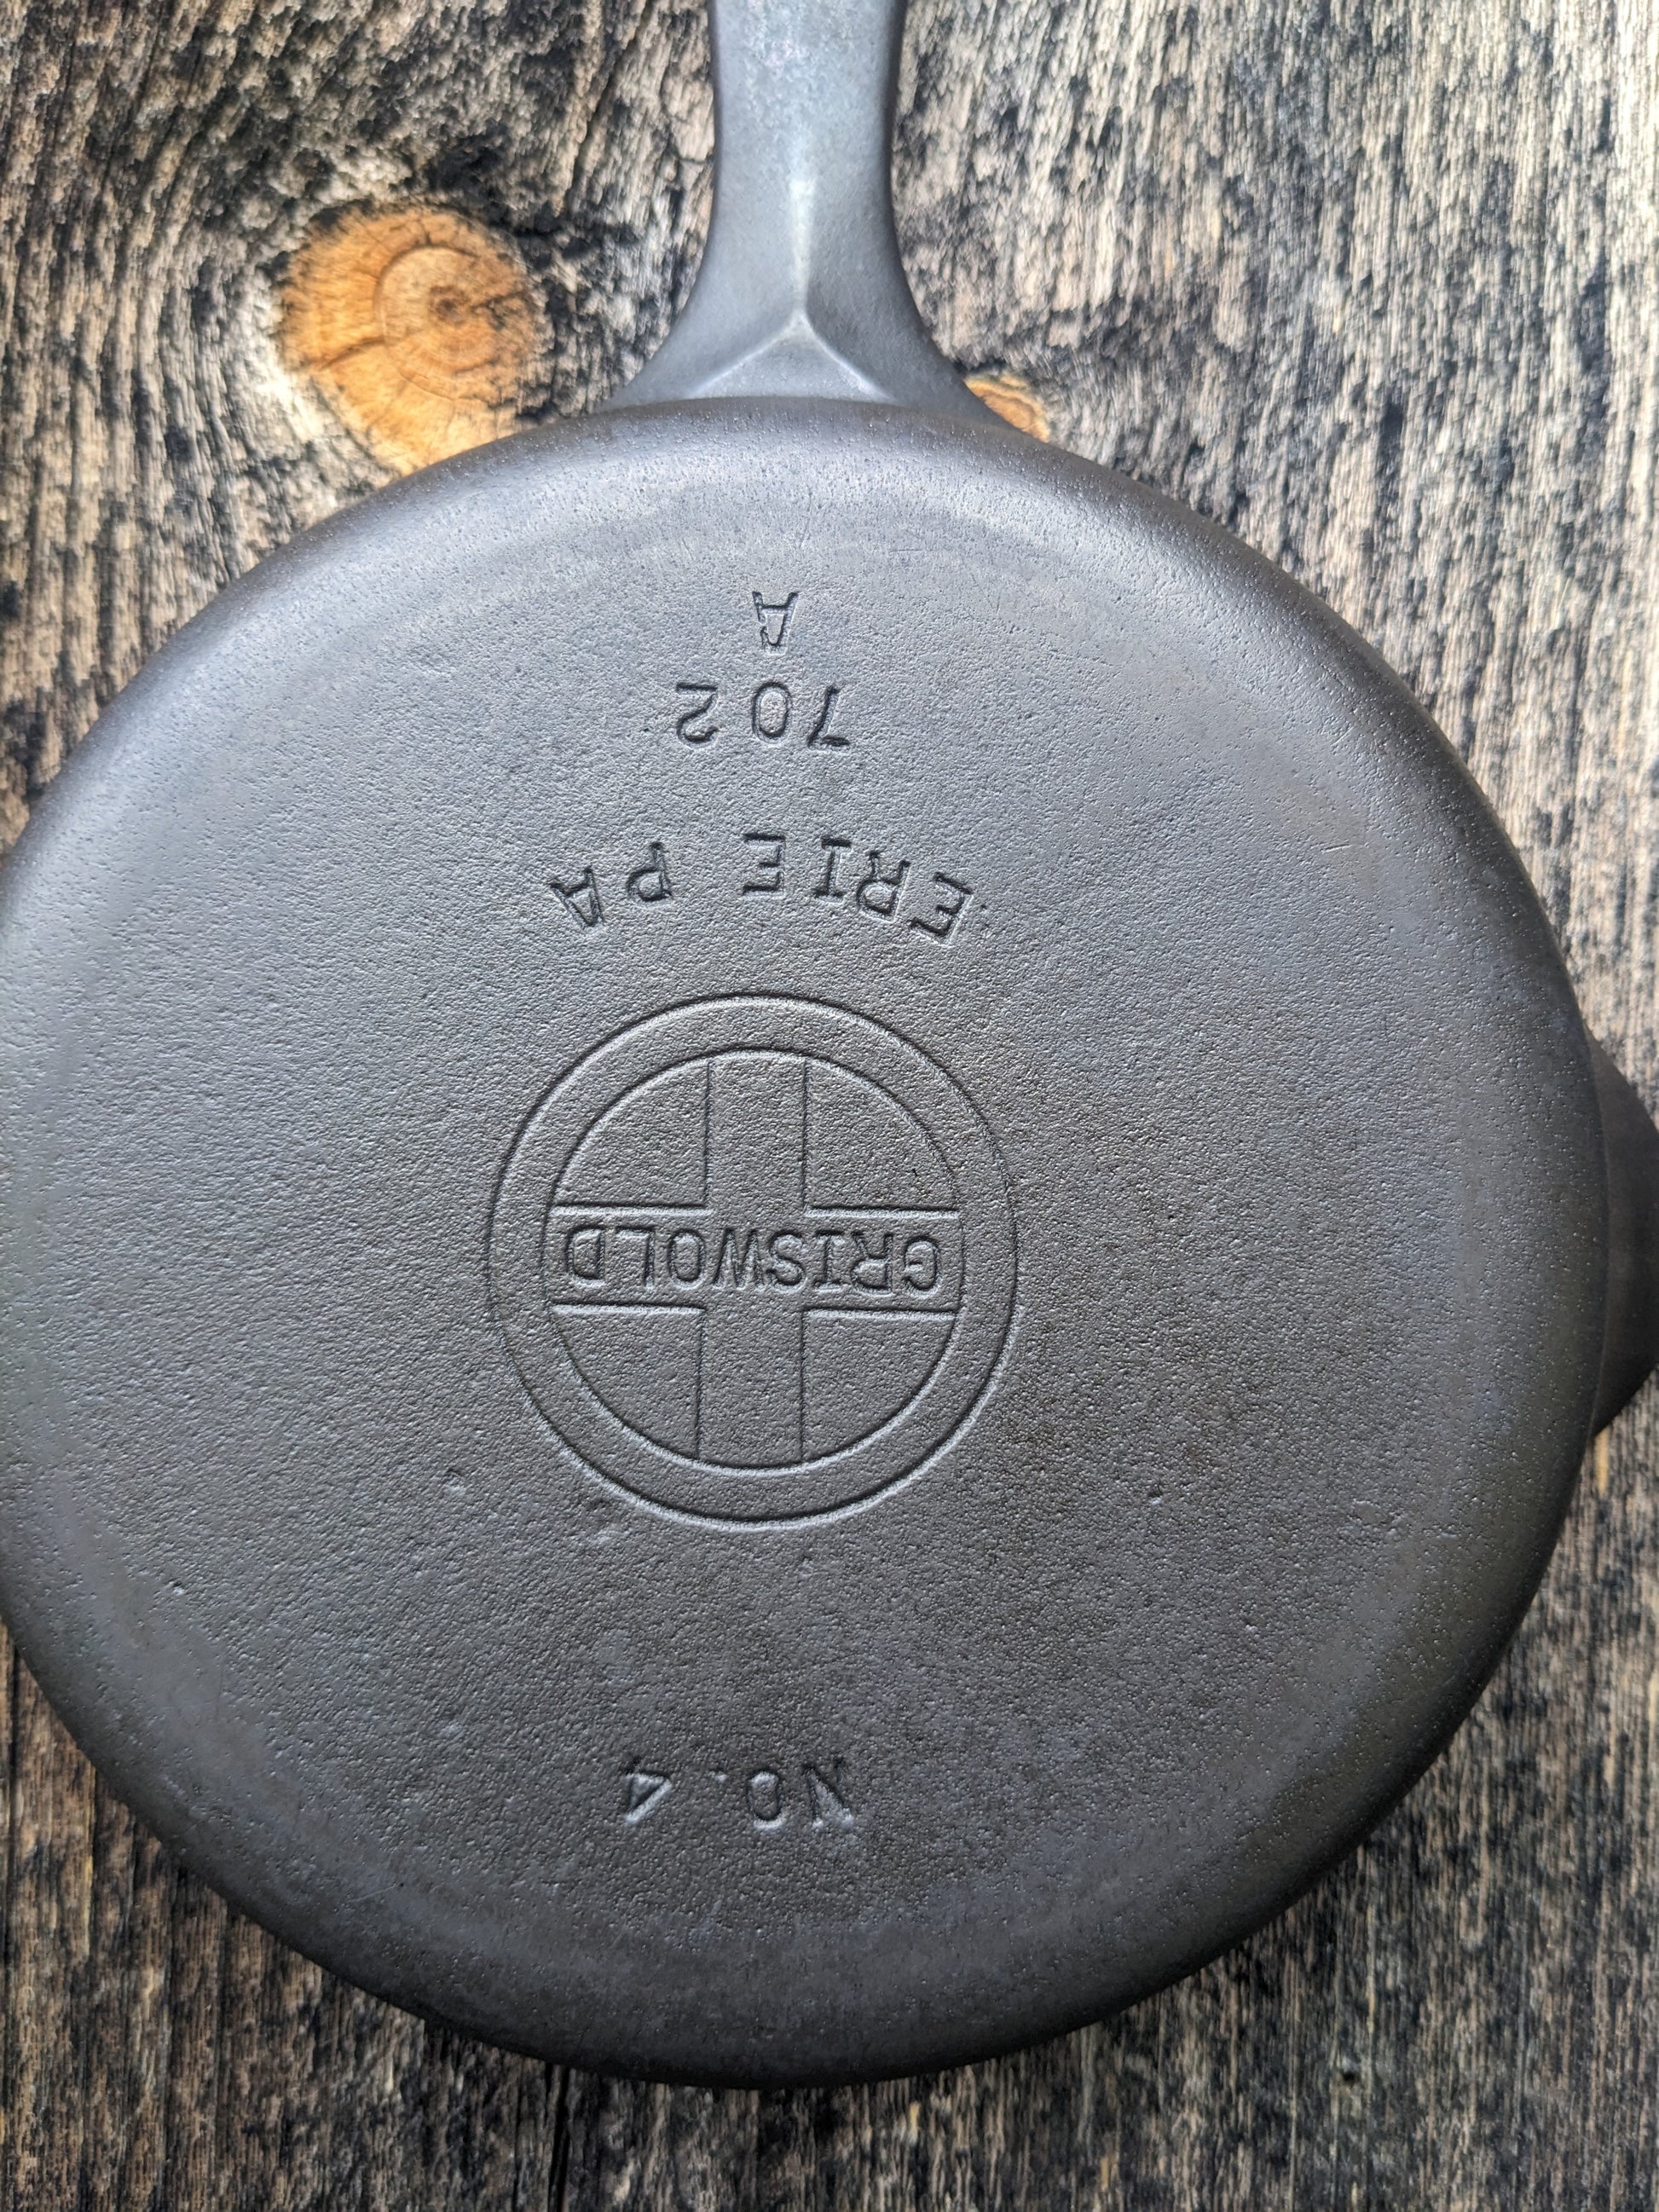 Vintage Griswold Erie PA 8 Cast Iron Skillet With Small Block